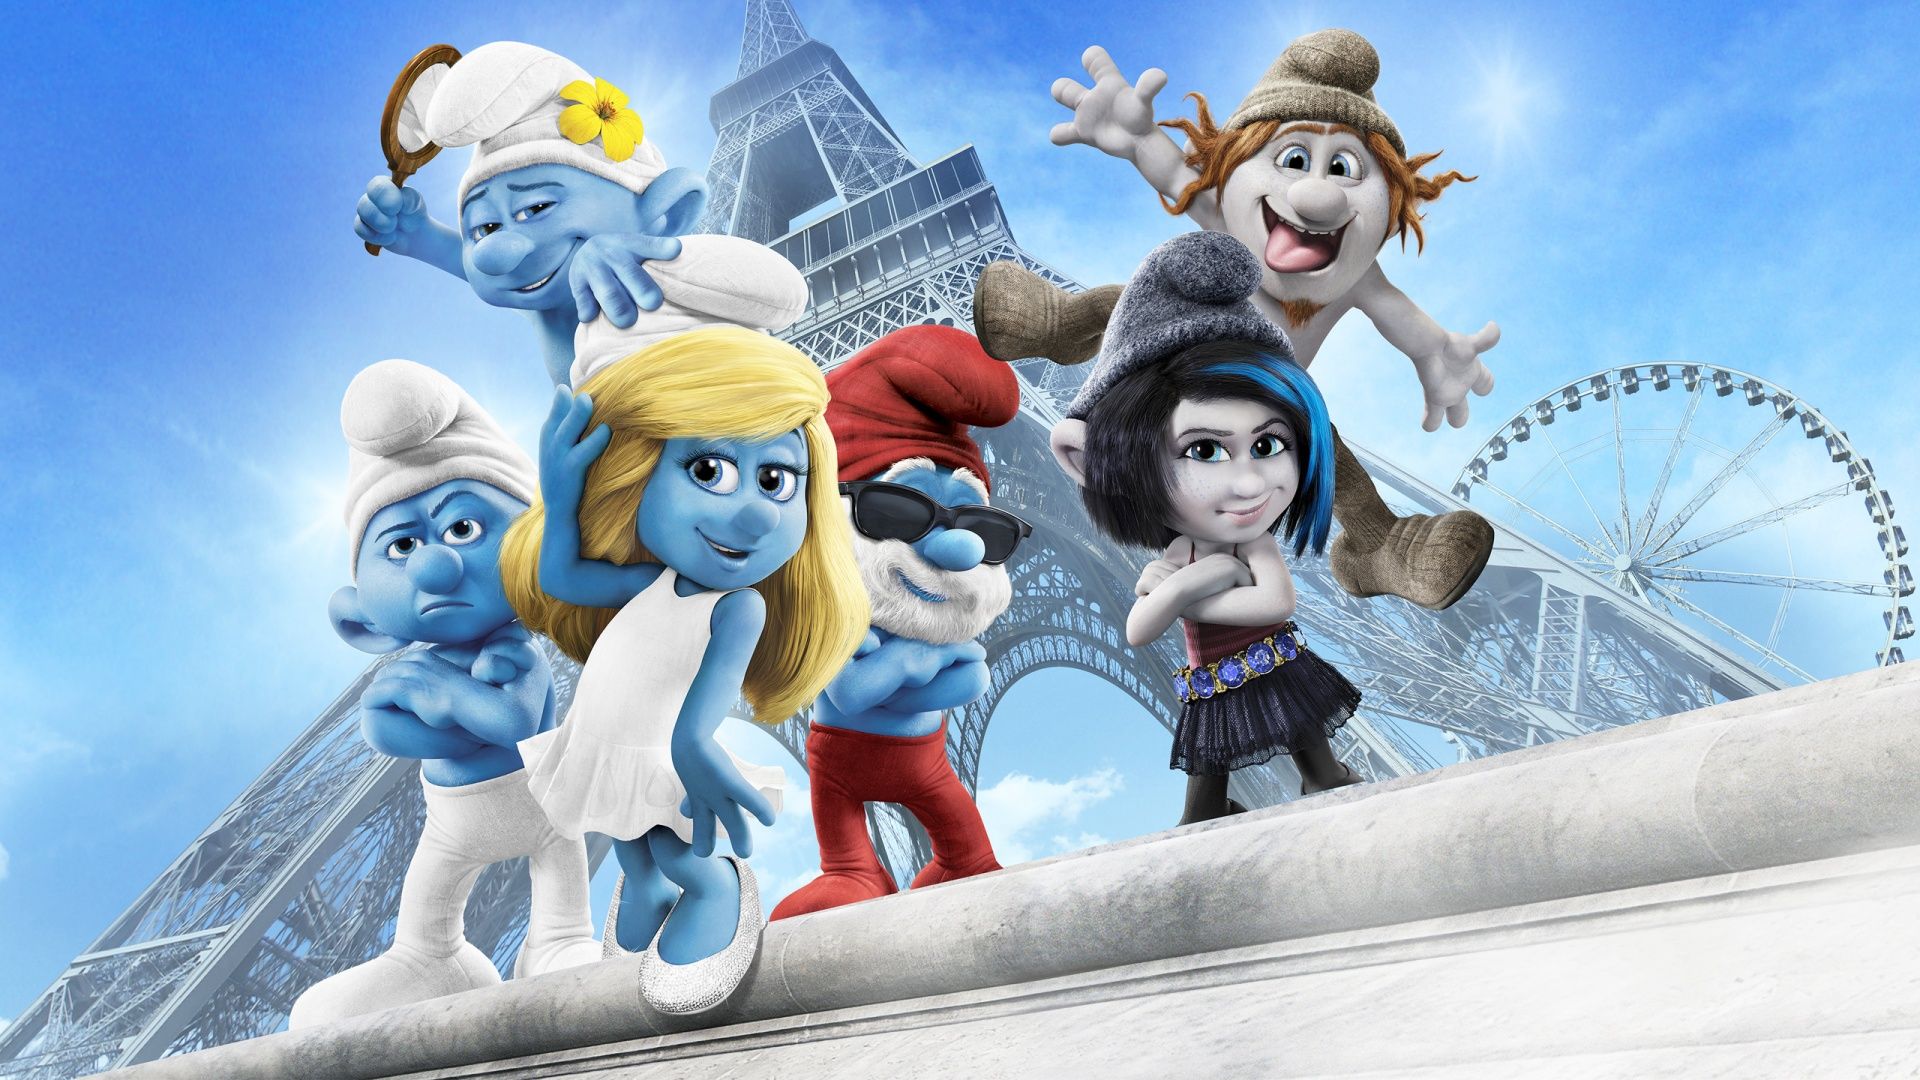 The Smurfs 2 Movie Wallpapers | HD Wallpapers